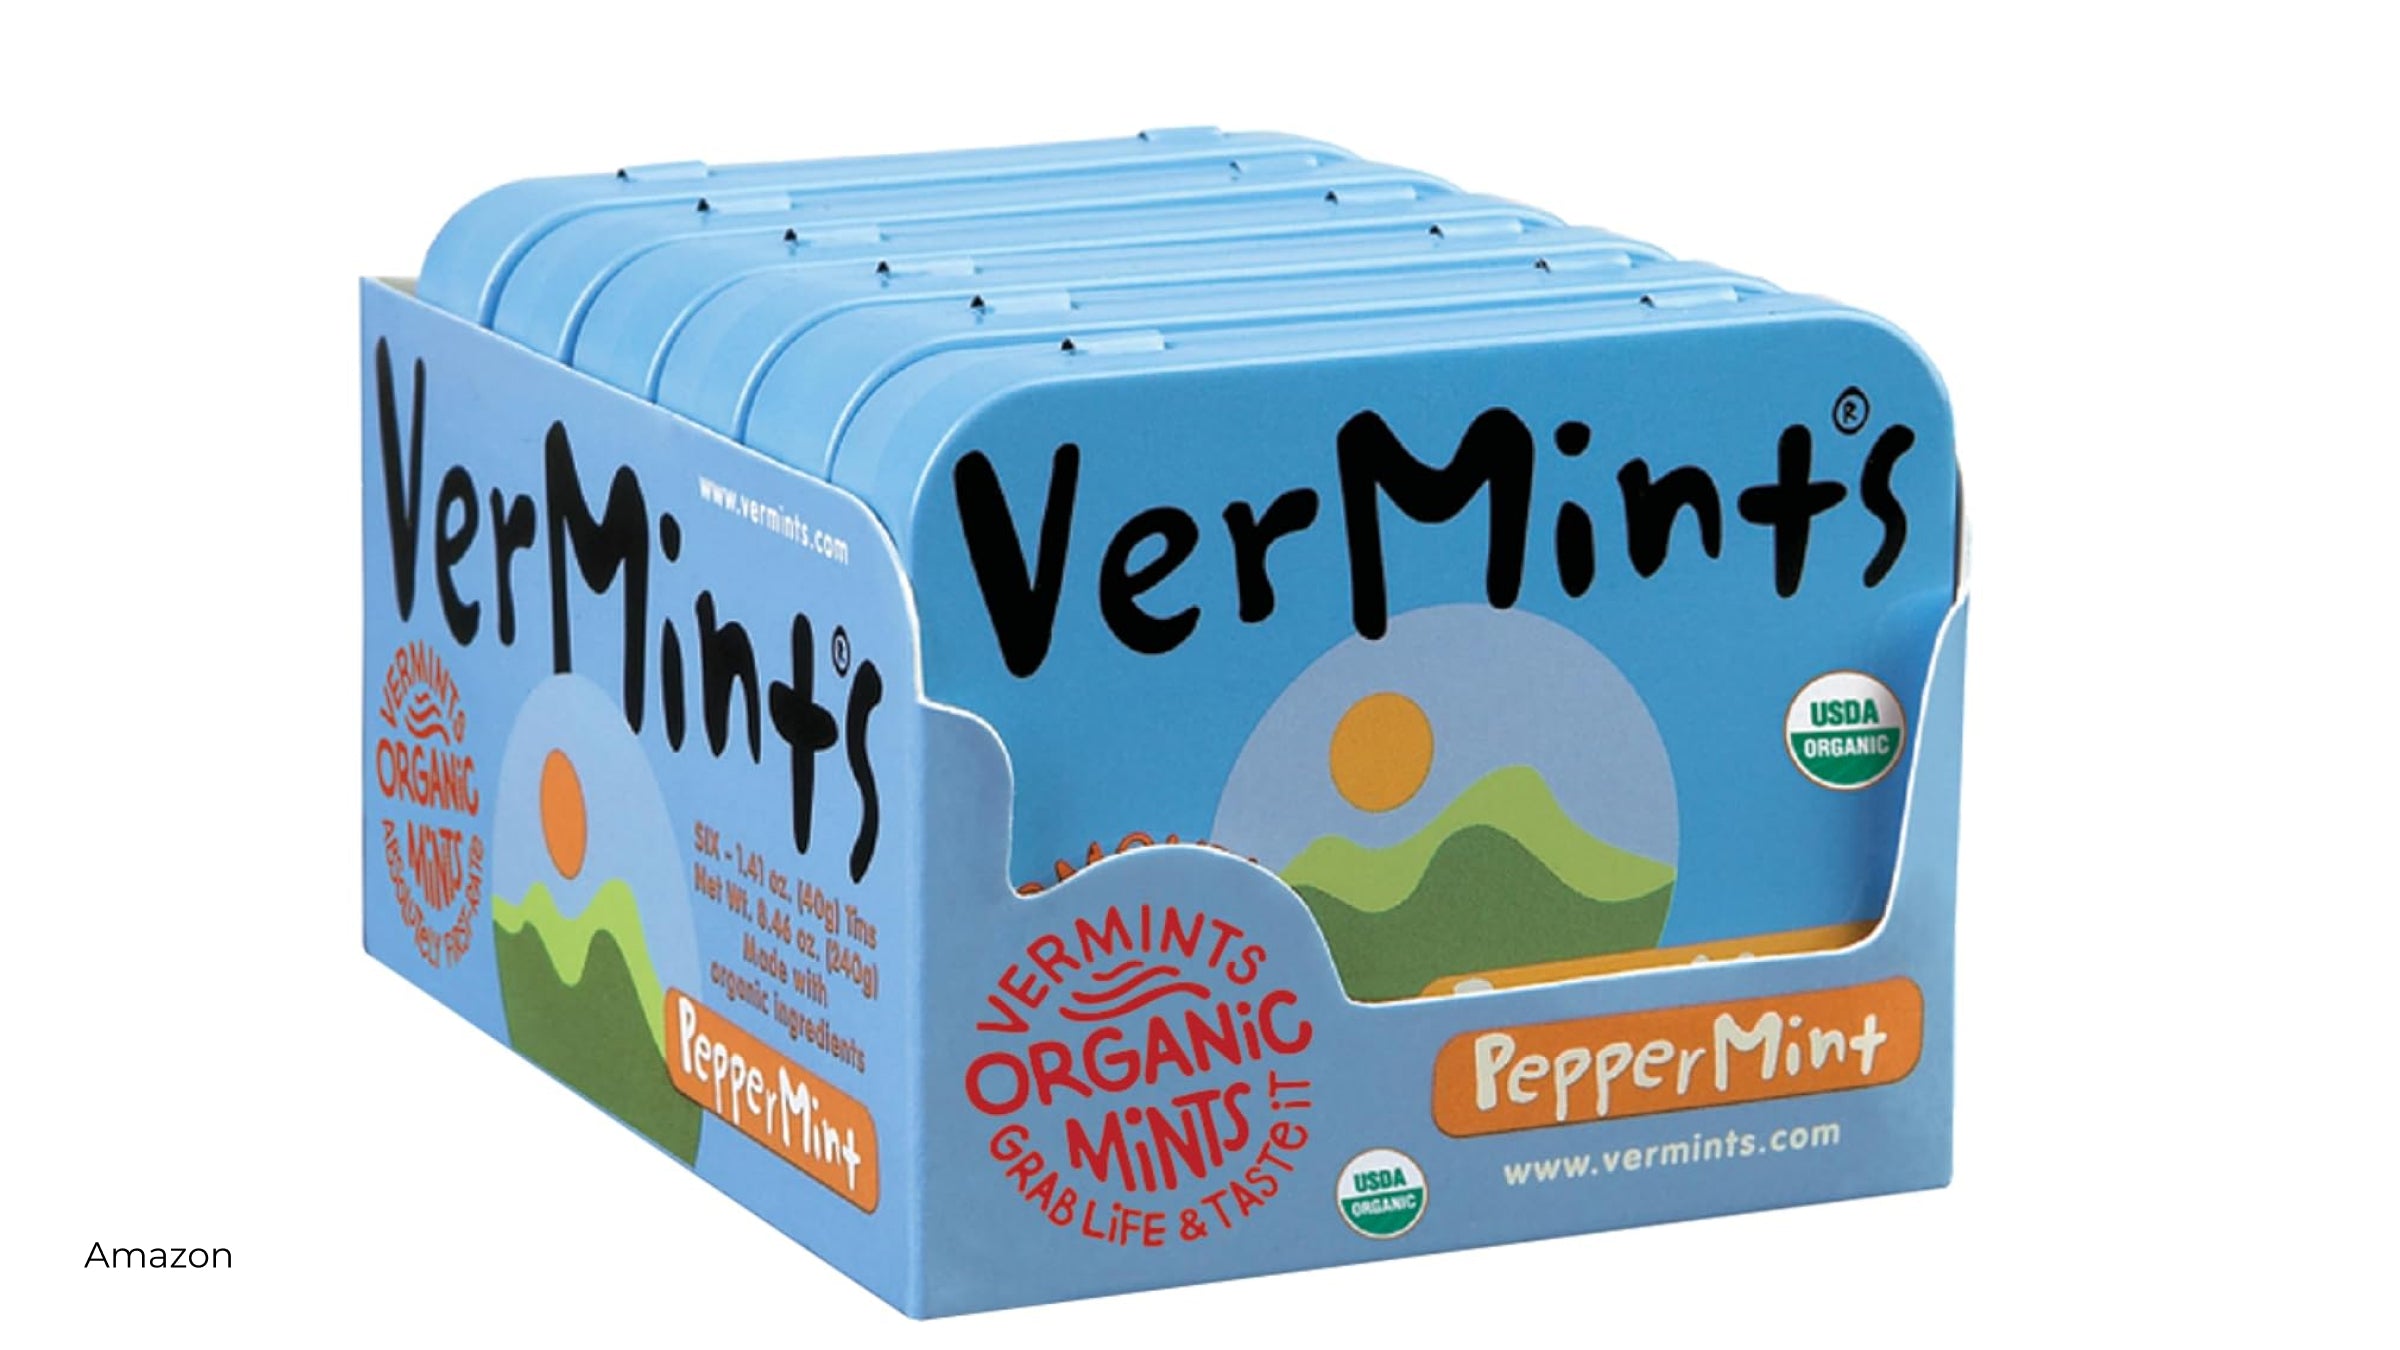 Organic peppermint mints from VerMints on Amazon